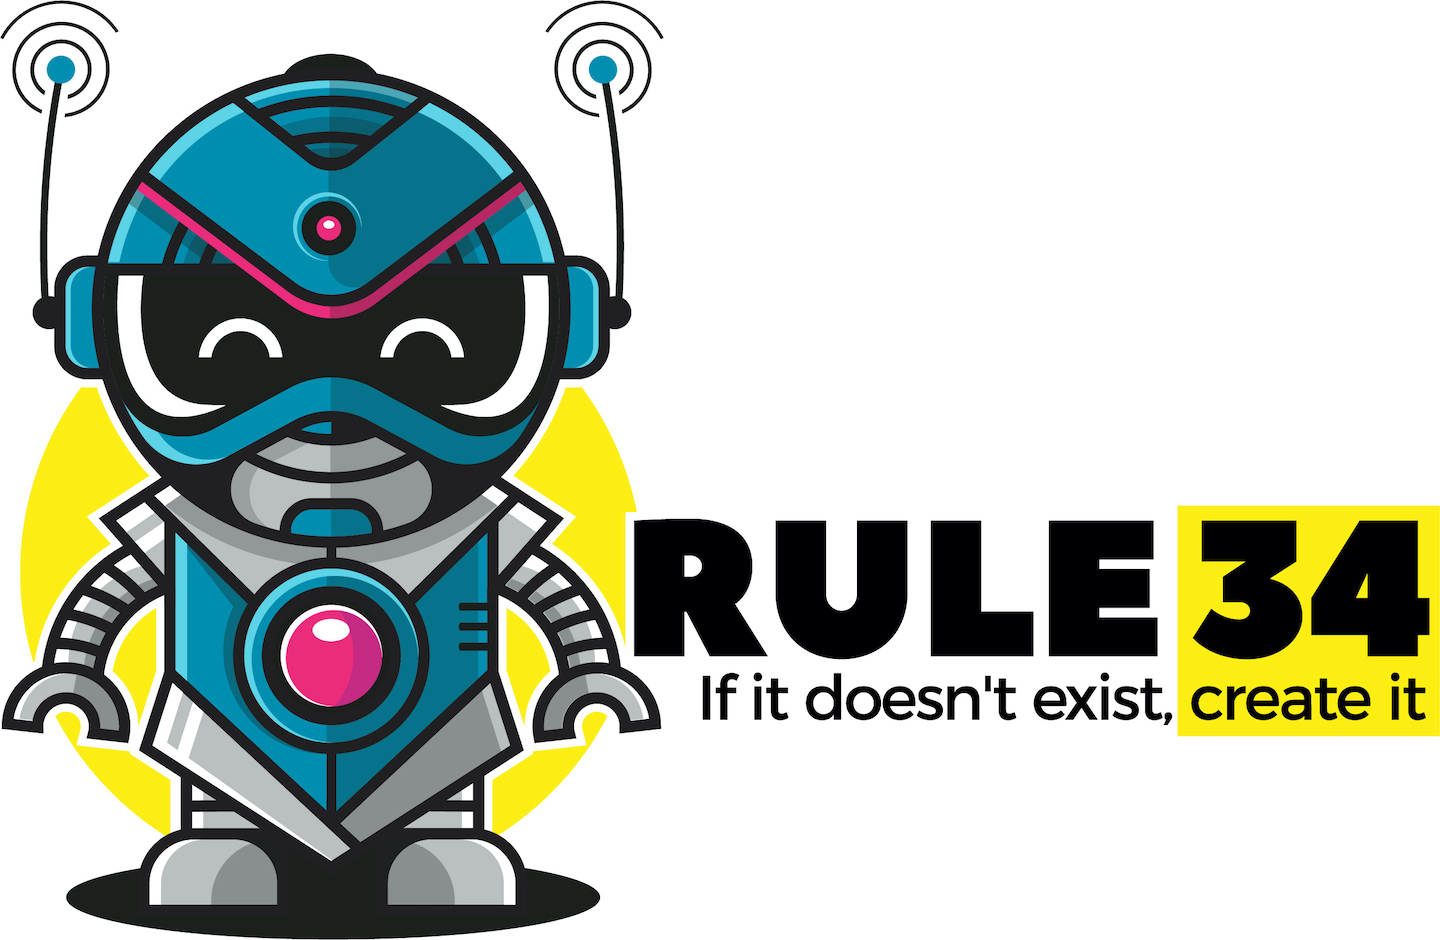 Rule 34 Web App Launches; Allows Users to Create Their Own Image-Boards,  Share Images and Post Comments Anonymously in Realtime - PR.com